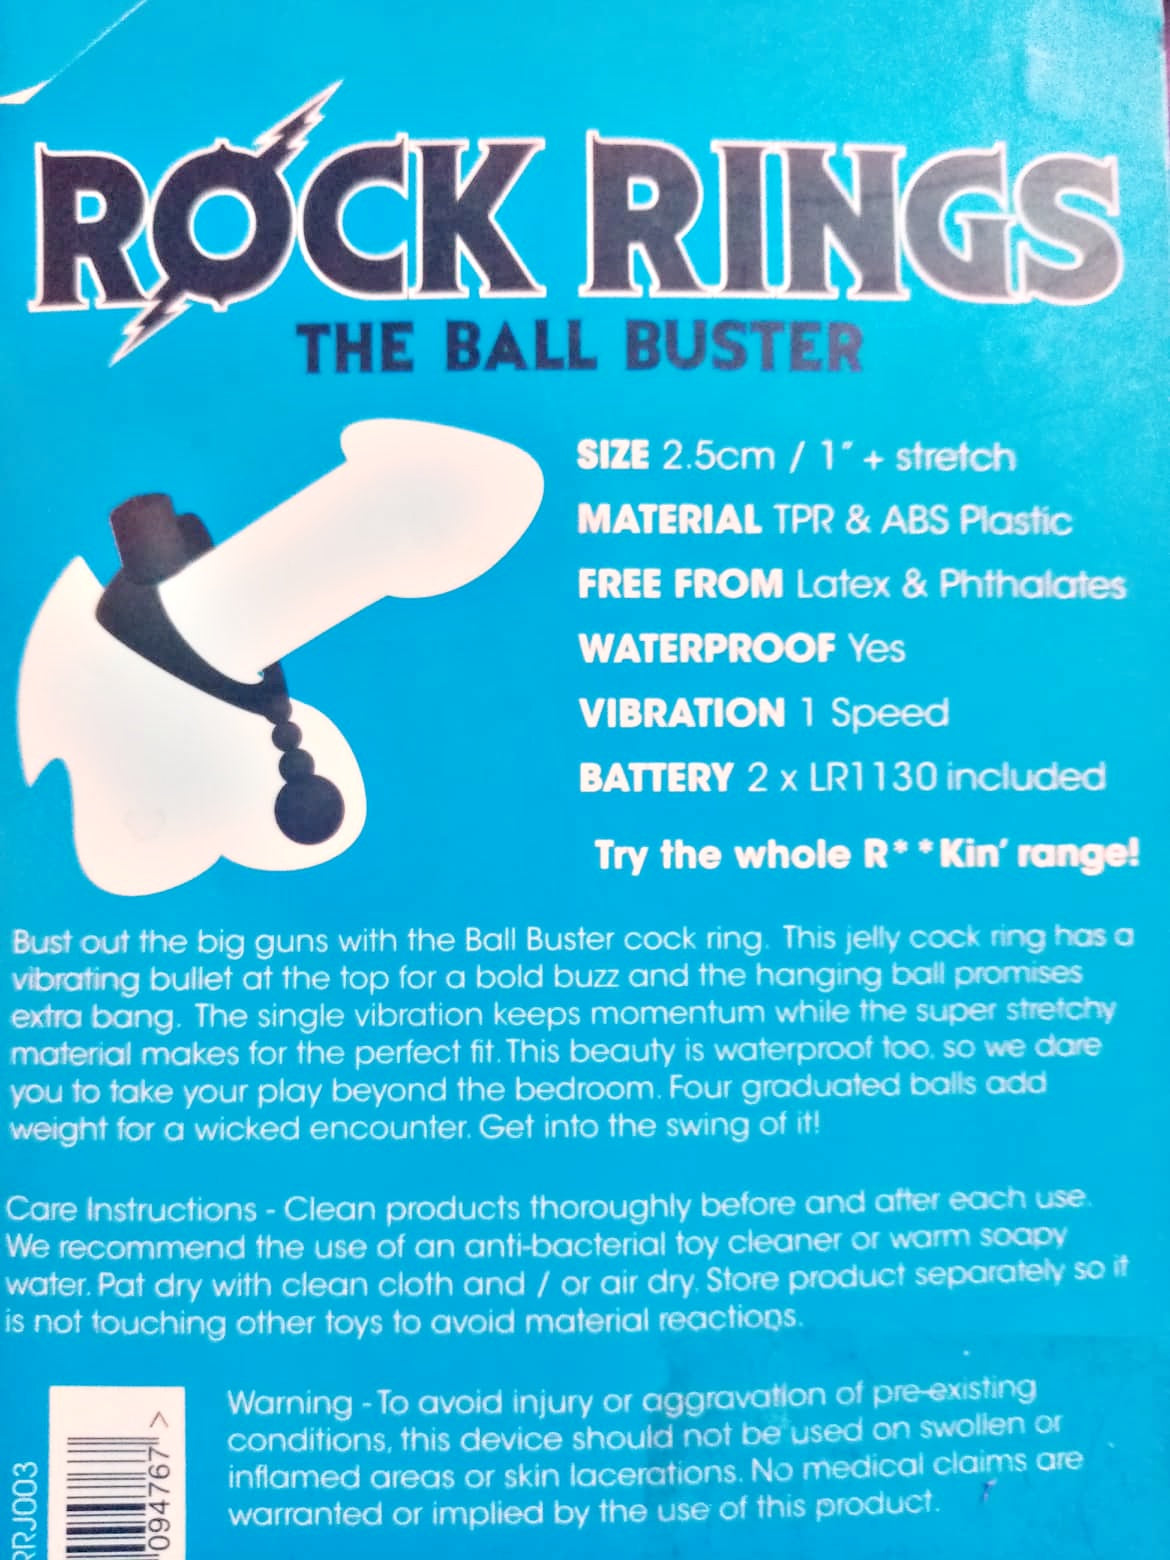 The ball Buster Rock Rings